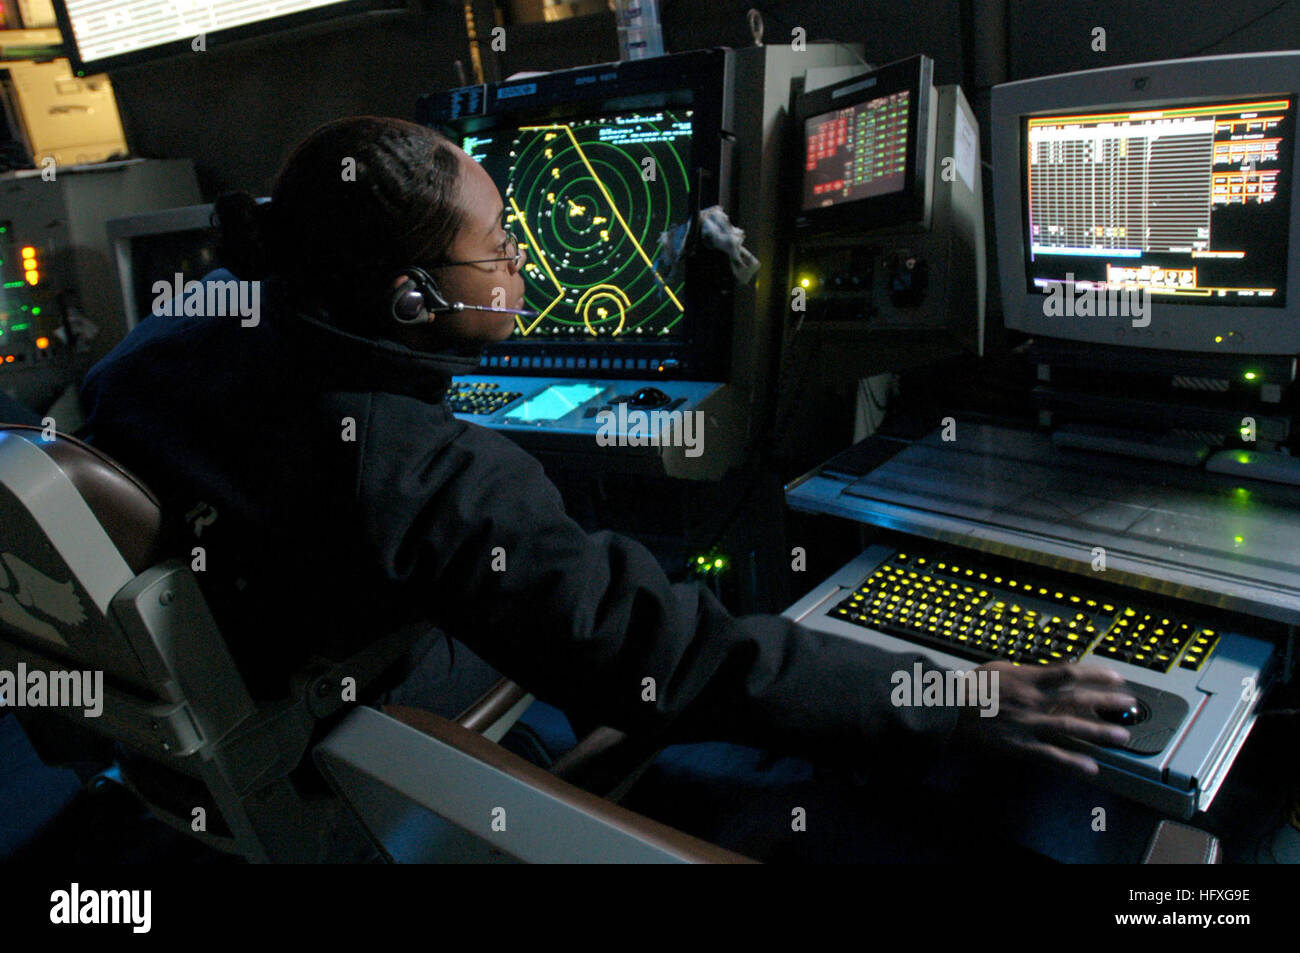 051118-N-9805F-506 Persian Gulf (Nov. 18, 2005) - Air Traffic Controller 2nd Class Petty Officer Alisa Barnes of Mobile, Ala., monitors both the Approach A and Approach ISIS consoles in the Carrier Air Traffic Control Center (CATCC) aboard USS Theodore Roosevelt (CVN 71). Roosevelt and embarked Carrier Air Wing Eight (CVW-8) are currently underway in the Persian Gulf supporting Operation Steel Curtain, a joint U.S.-Iraqi military offensive aimed at preventing cells of Al Qaeda from entering Iraq through the Syrian border.  U.S. Navy photo by Photographer's Mate Airman Tony Foster (RELEASED) US Stock Photo